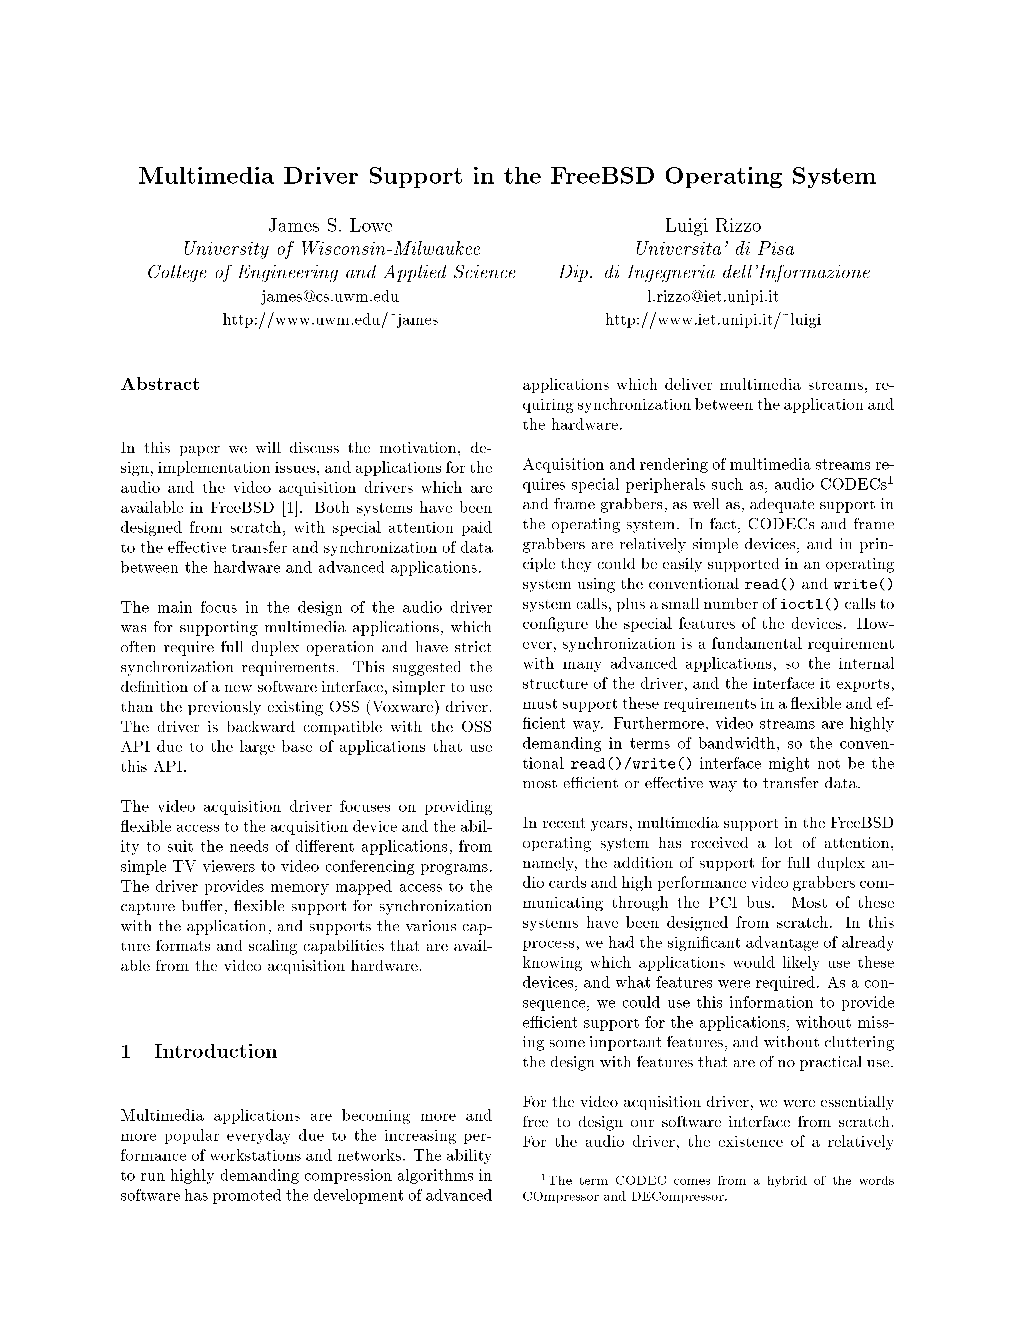 Multimedia Driver Support in the Freebsd Operating System